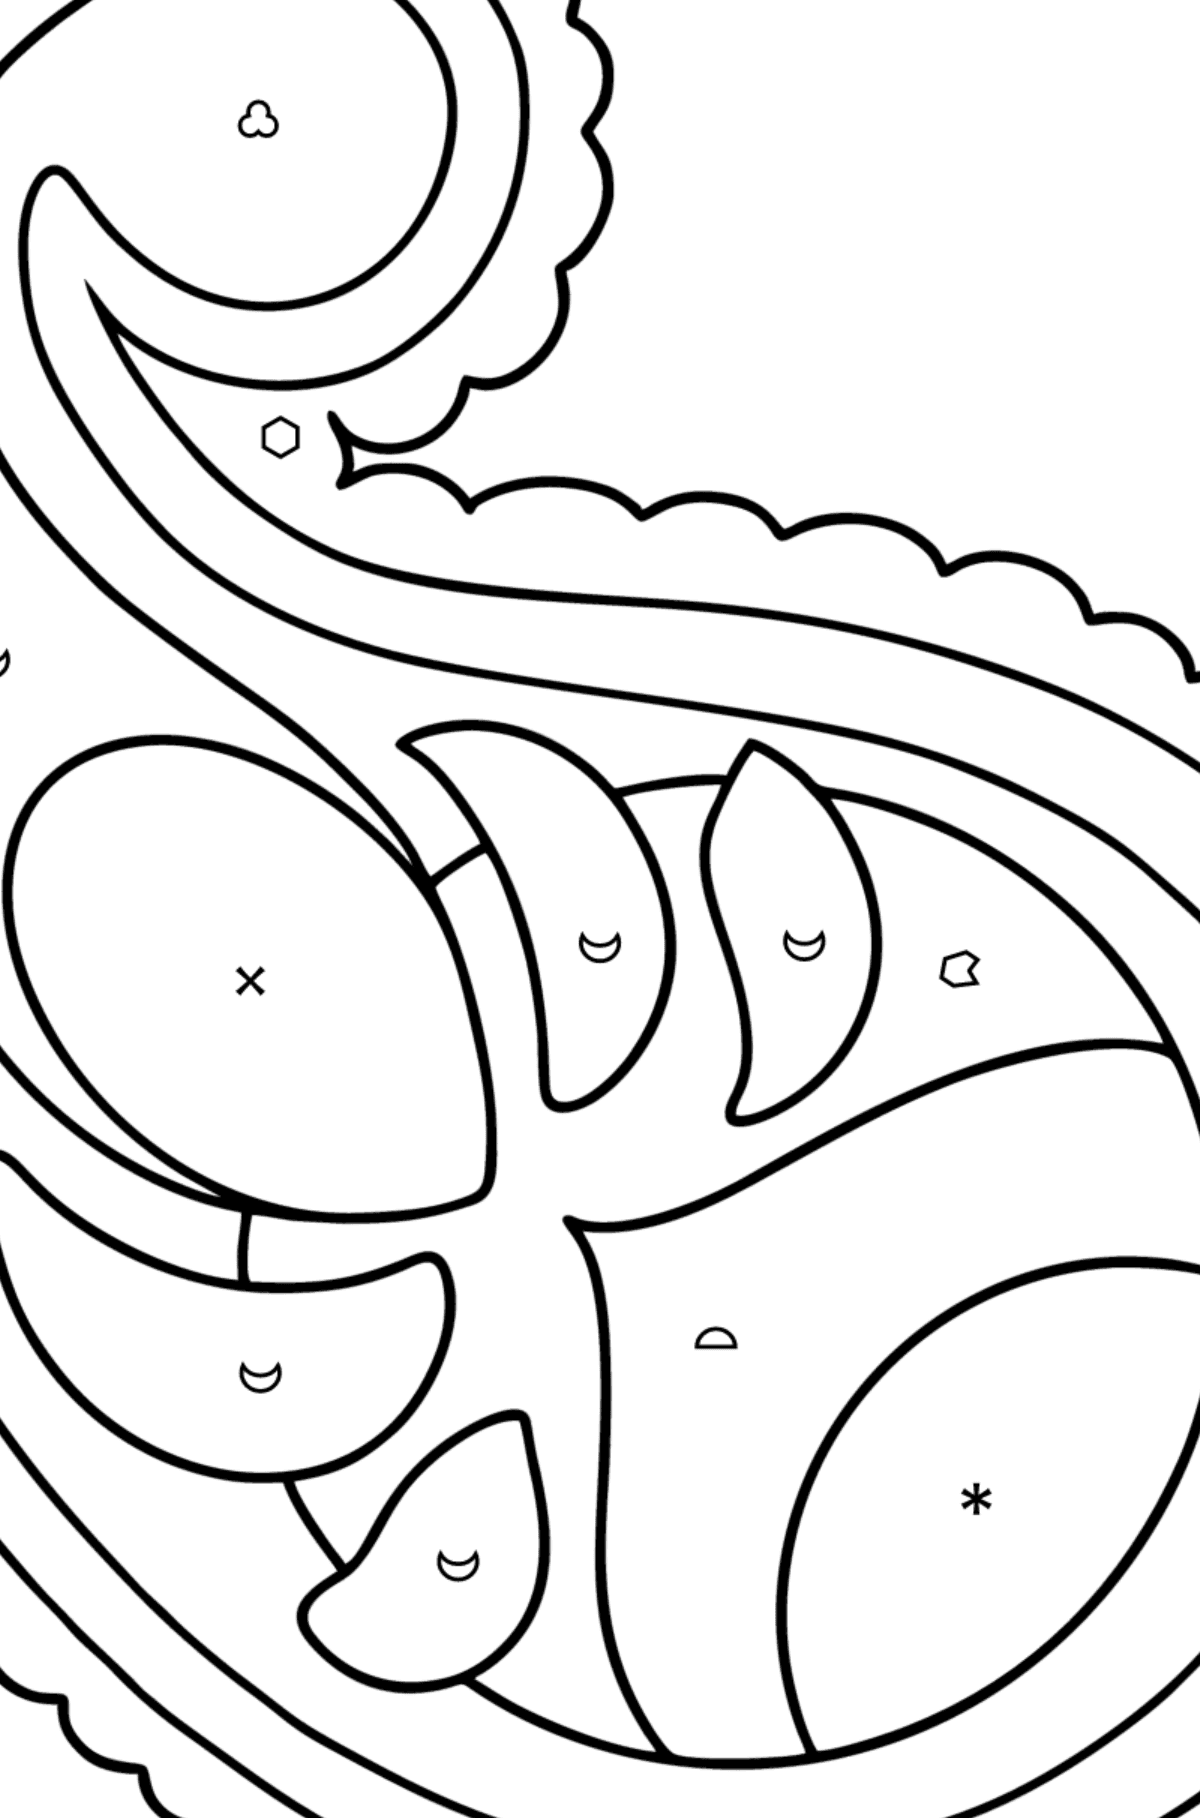 Paisley for Kids coloring page - Coloring by Symbols and Geometric Shapes for Kids